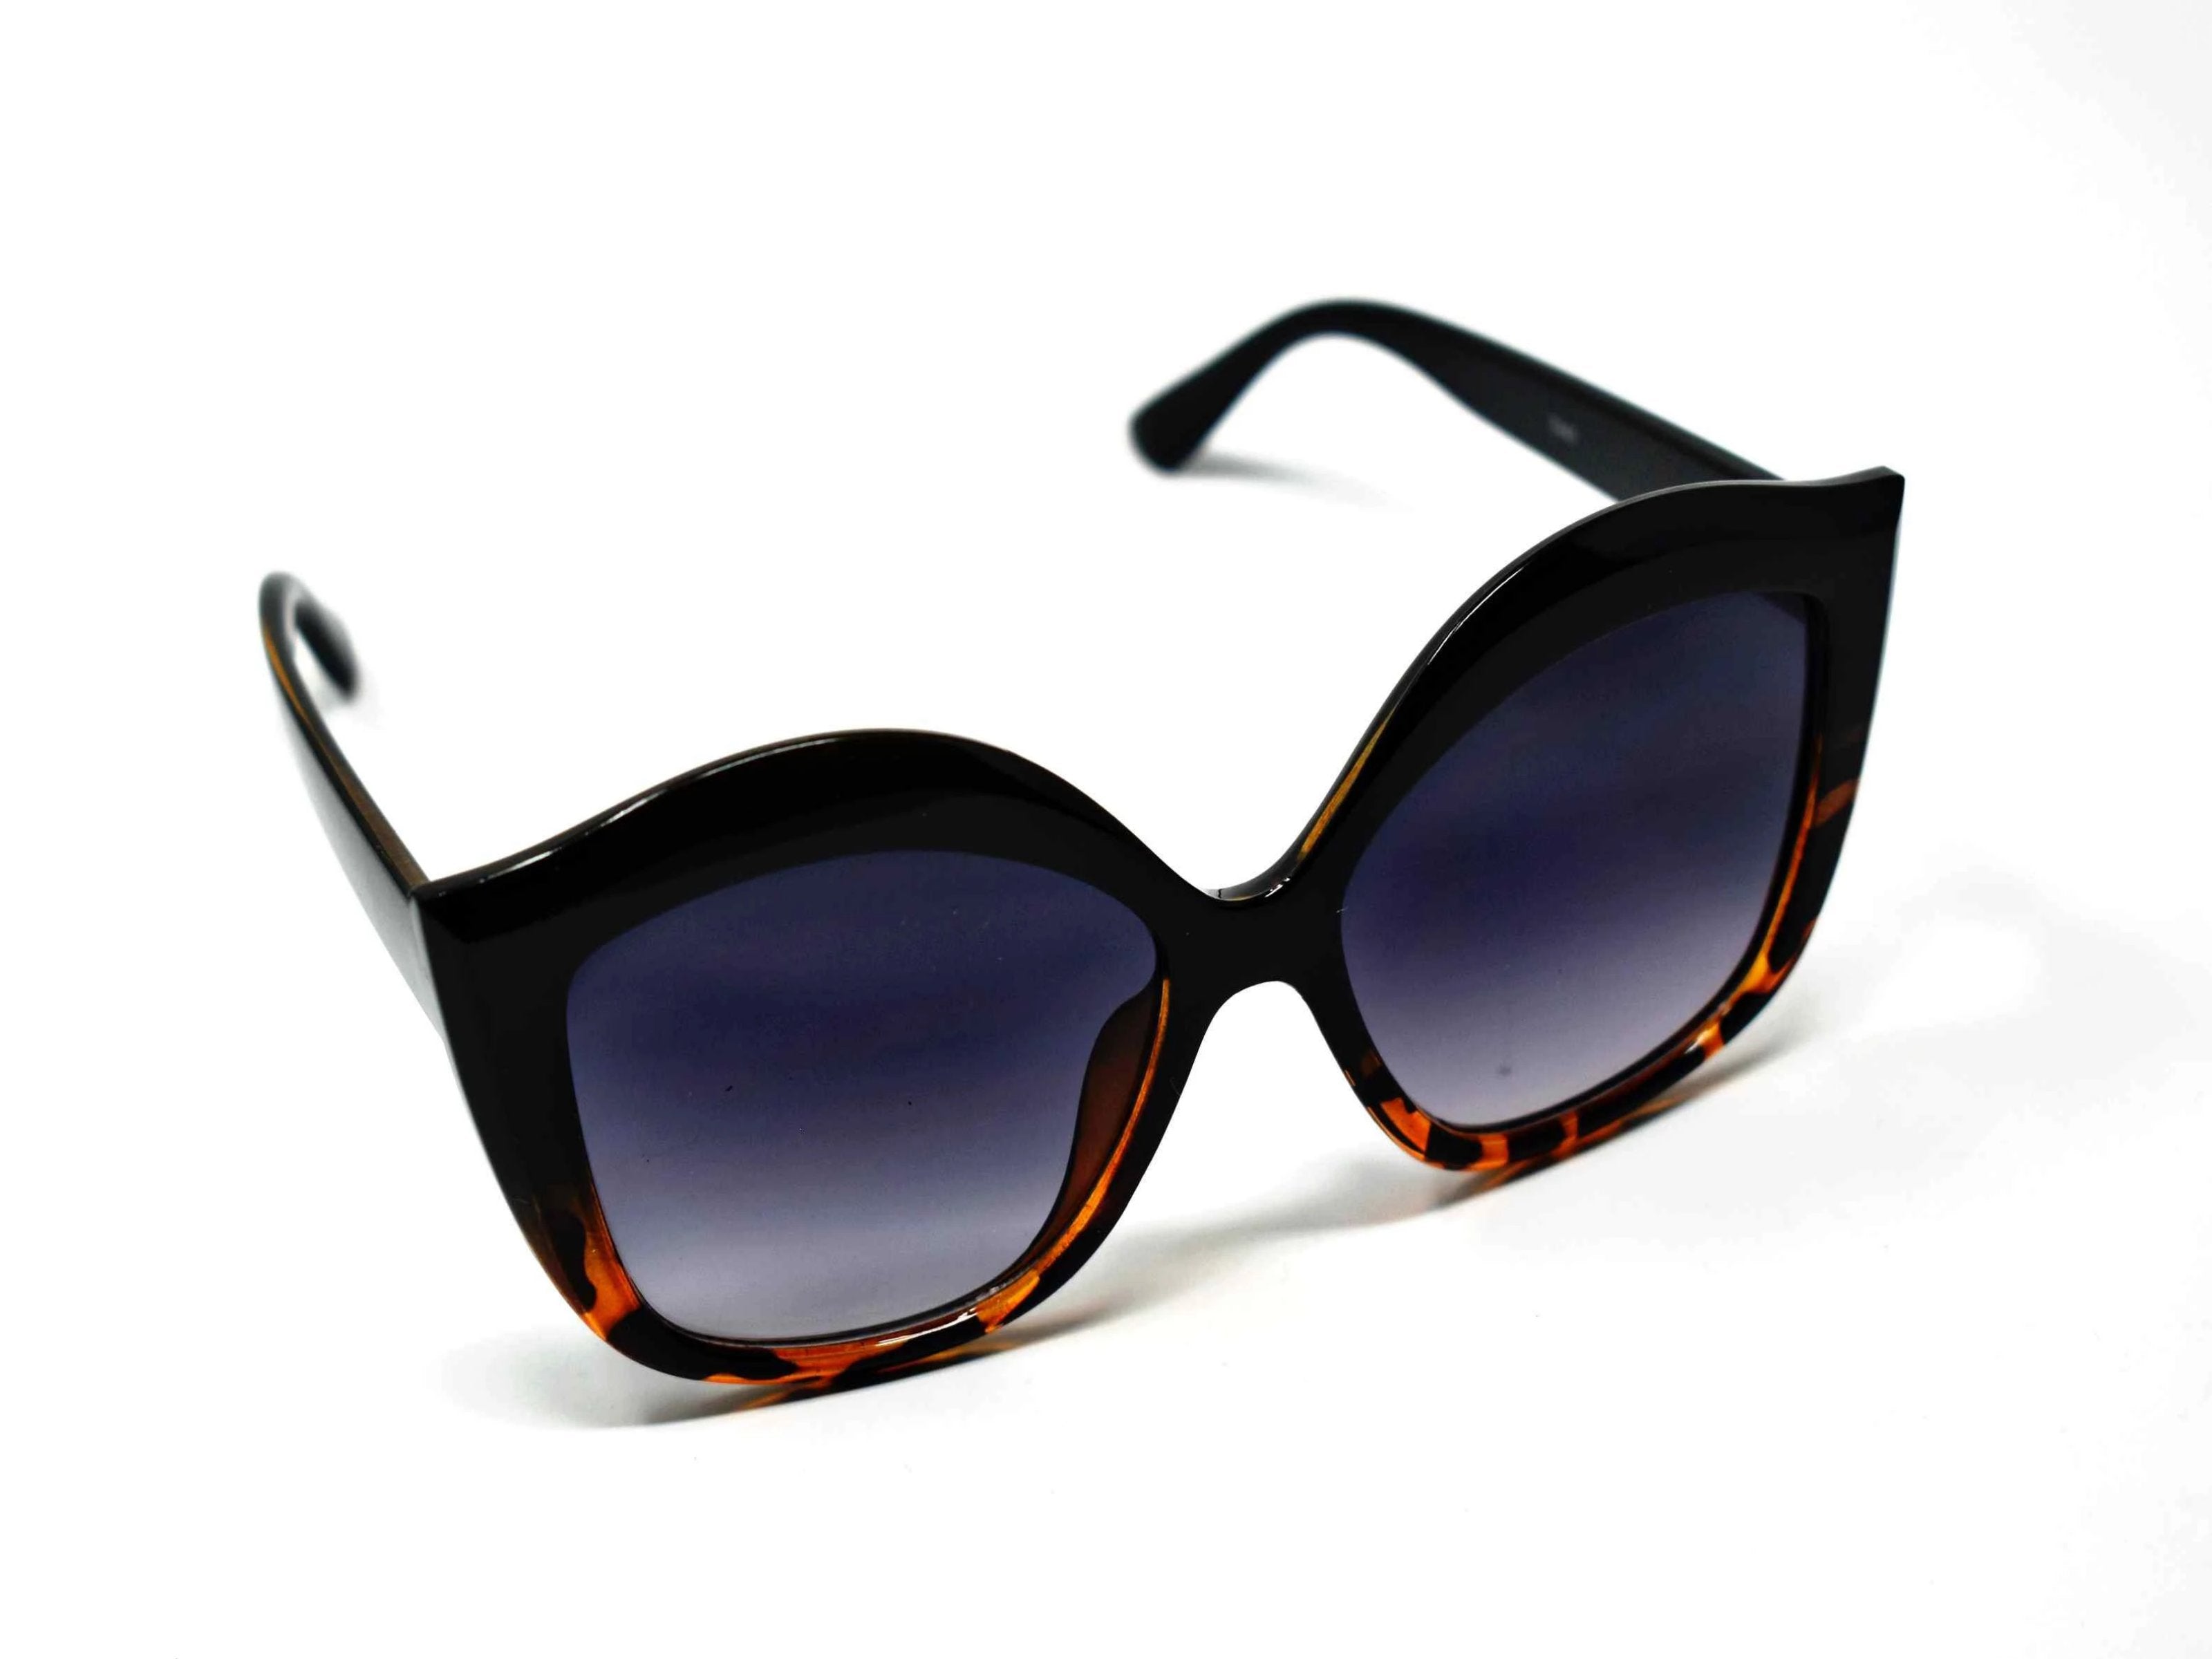 Retro glam has come again with our Petal black and leopard cat eye frame sunglasses with a black lens.